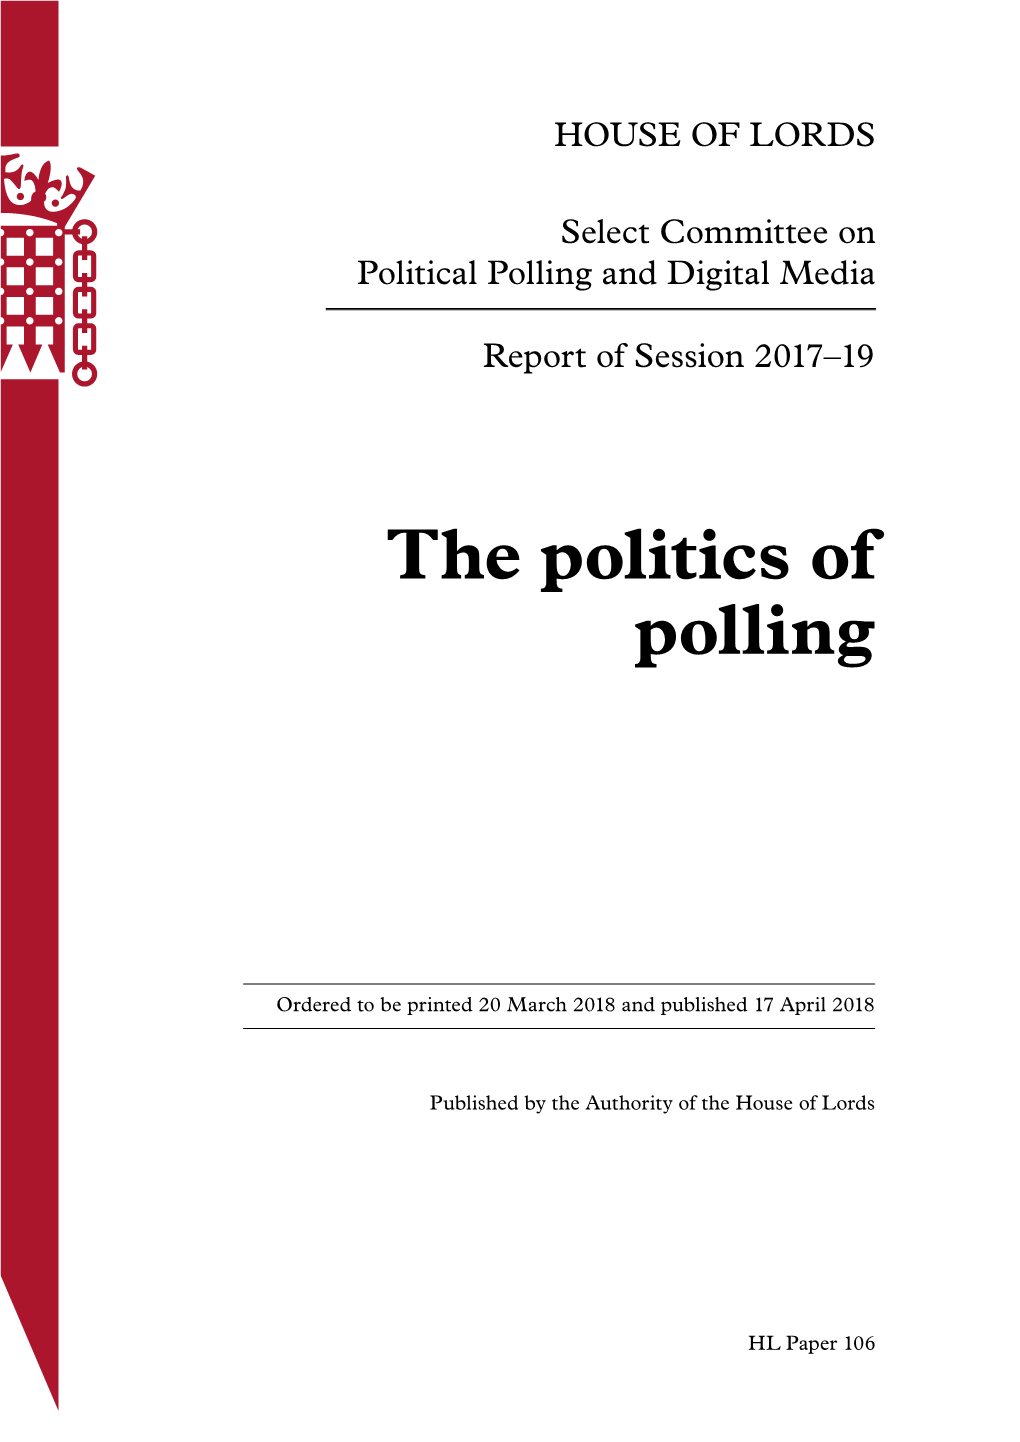 The Politics of Polling